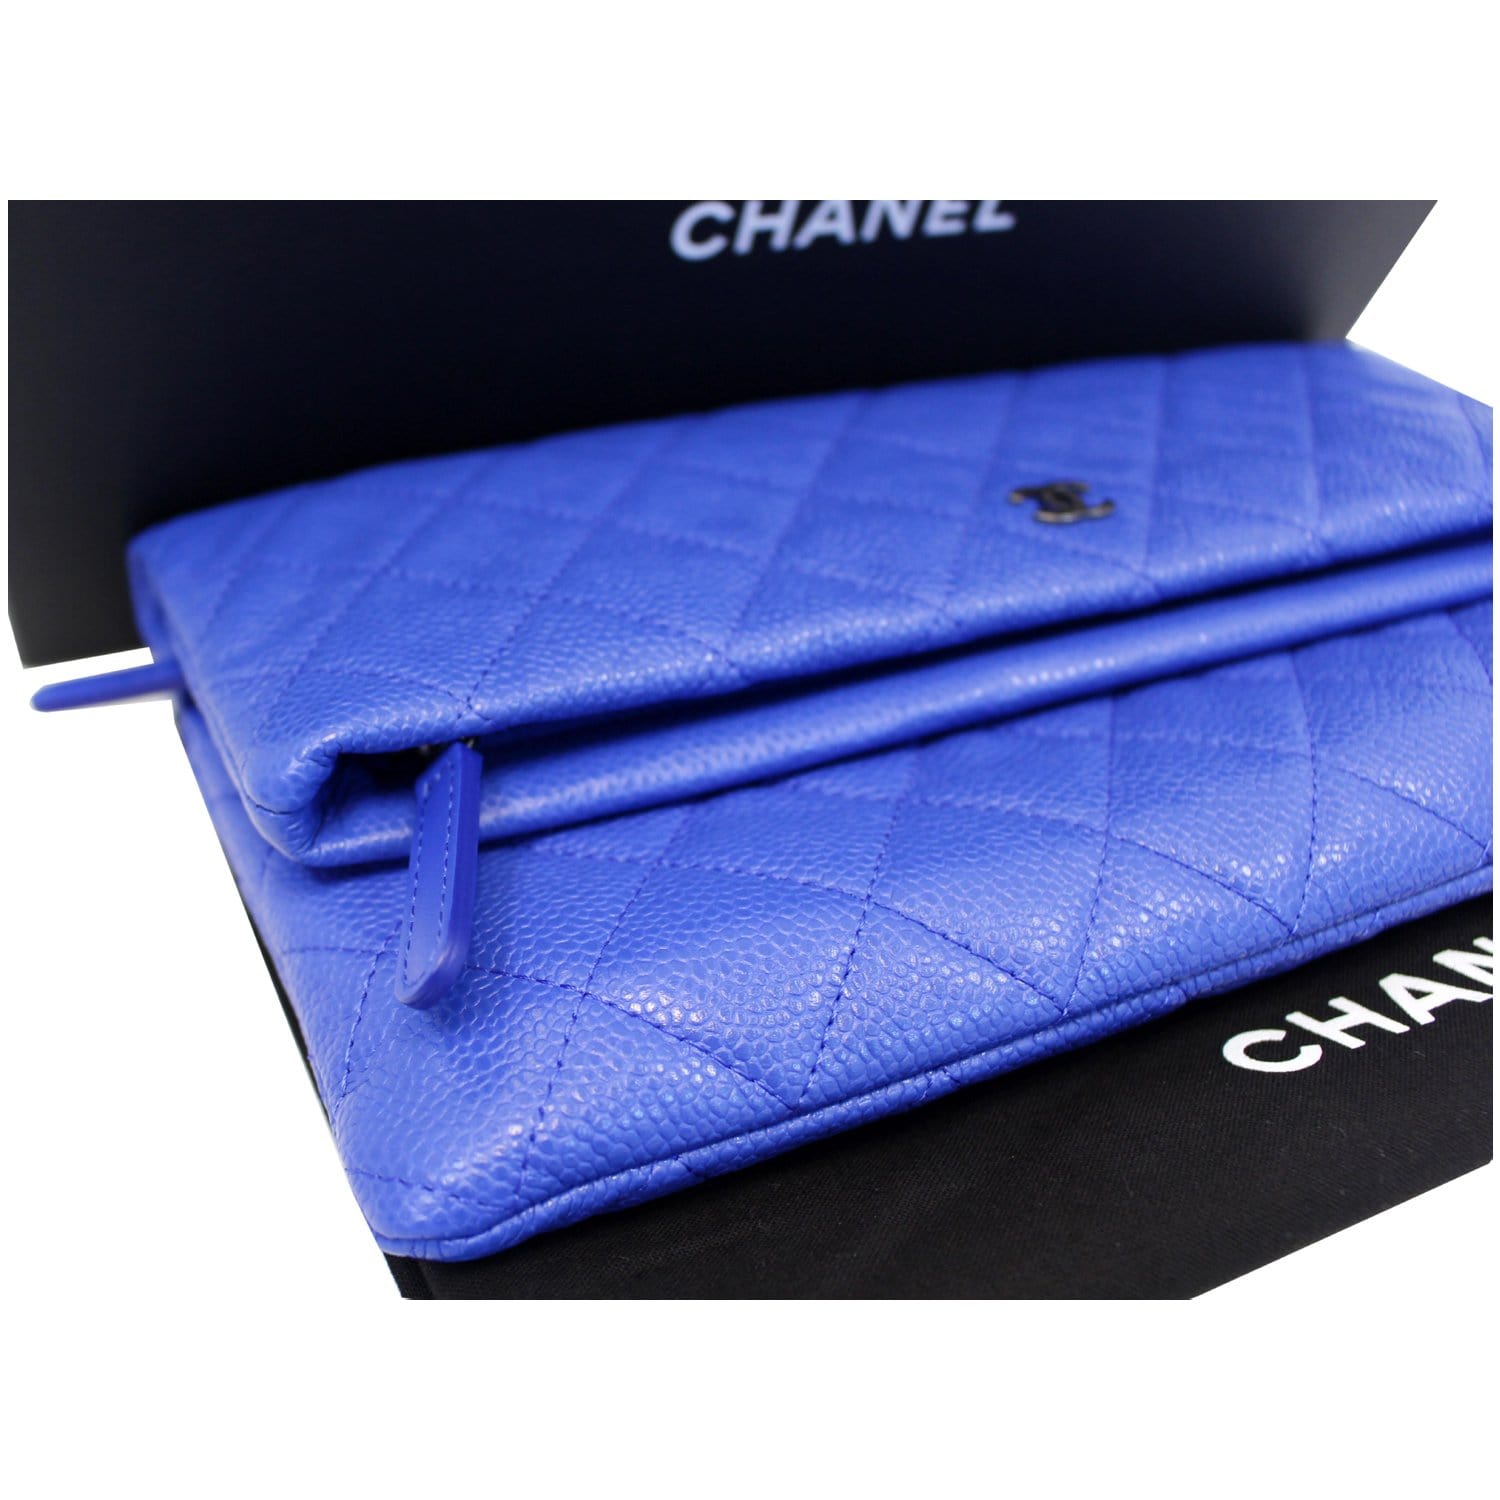 Chanel - Authenticated Clutch Bag - Leather Blue Plain for Women, Never Worn